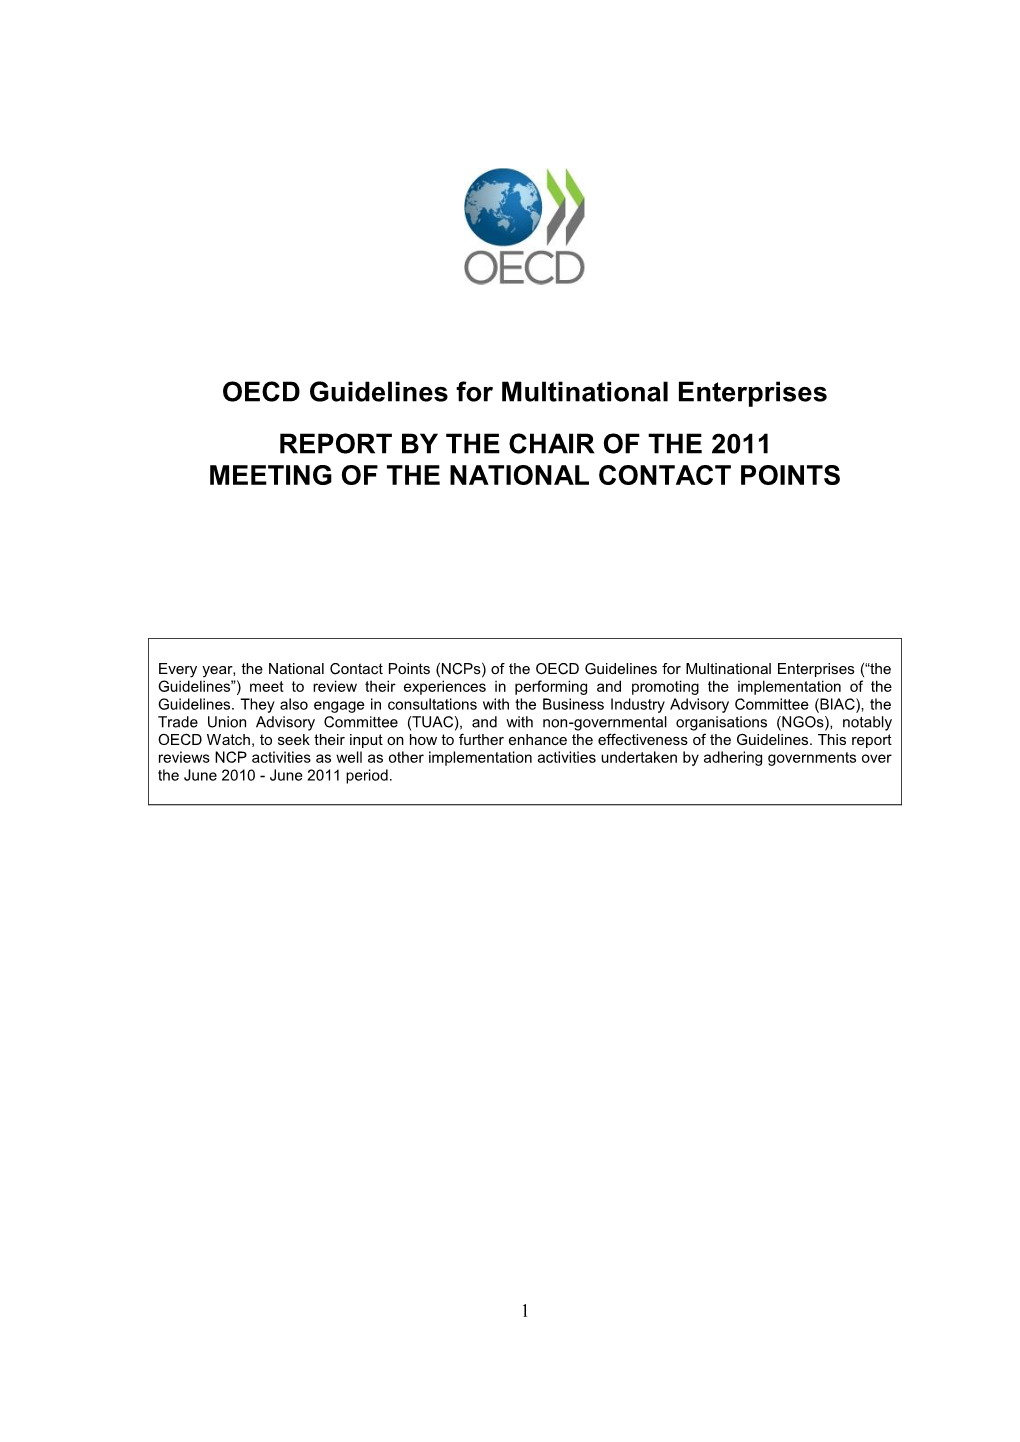 OECD Guidelines for Multinational Enterprises REPORT by the CHAIR of the 2011 MEETING of the NATIONAL CONTACT POINTS